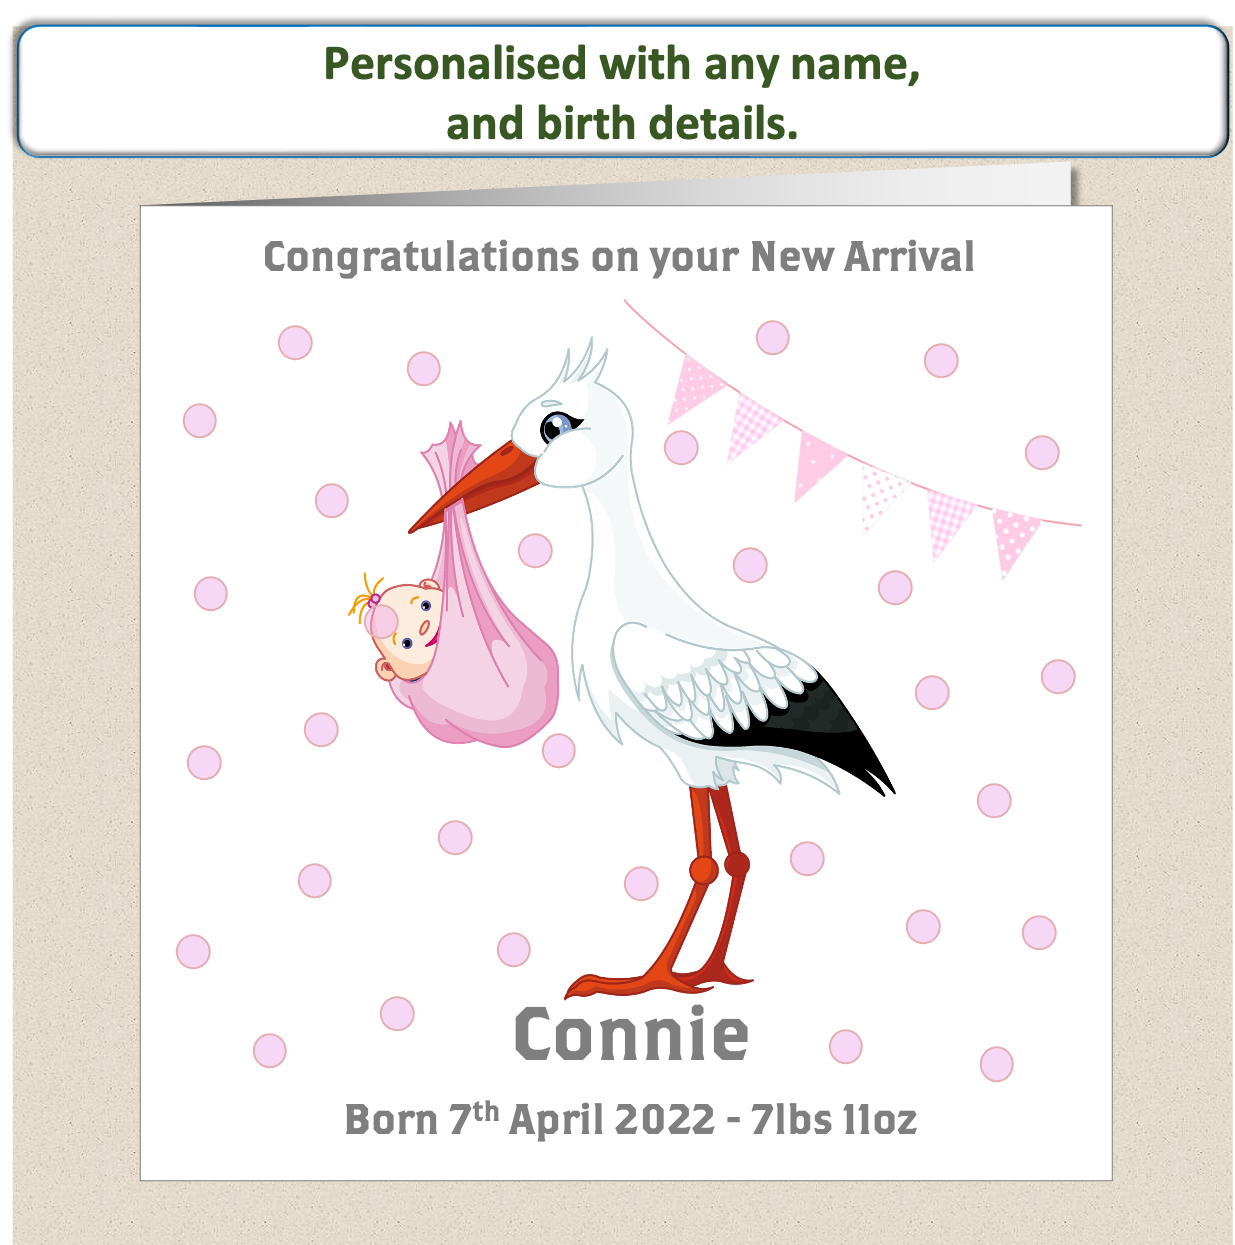 Personalised New Baby Arrival Congratulations Card - Stork Pink